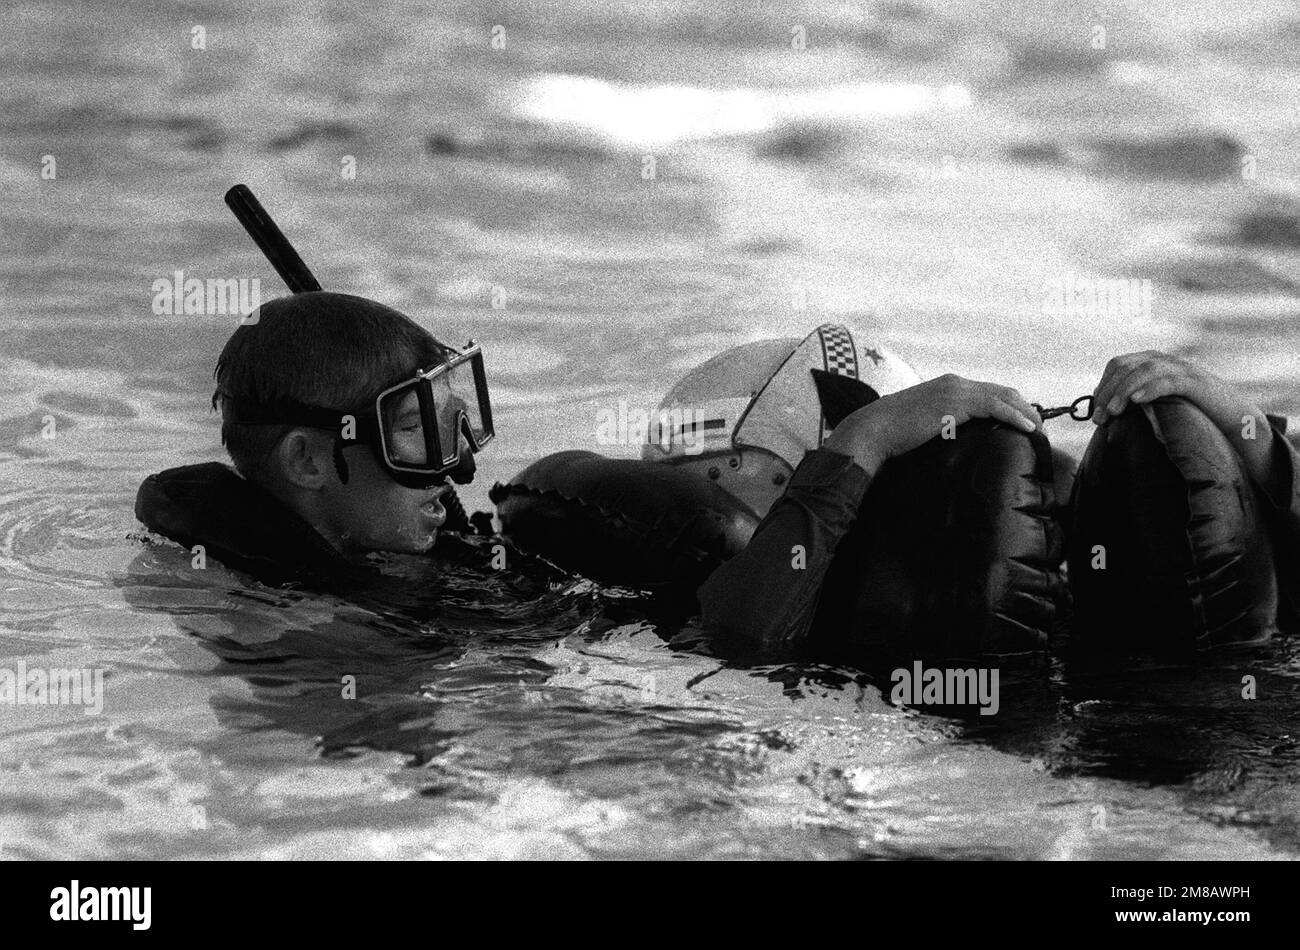 A student comes to the aid of a downed aviator during a simulated rescue, part of the twenty-day, intensive training course at the Navy Rescue Swimmer School. Exact Date Shot Unknown. Base: Naval Air Station, Pensacola State: Florida (FL) Country: United States Of America (USA) Stock Photo